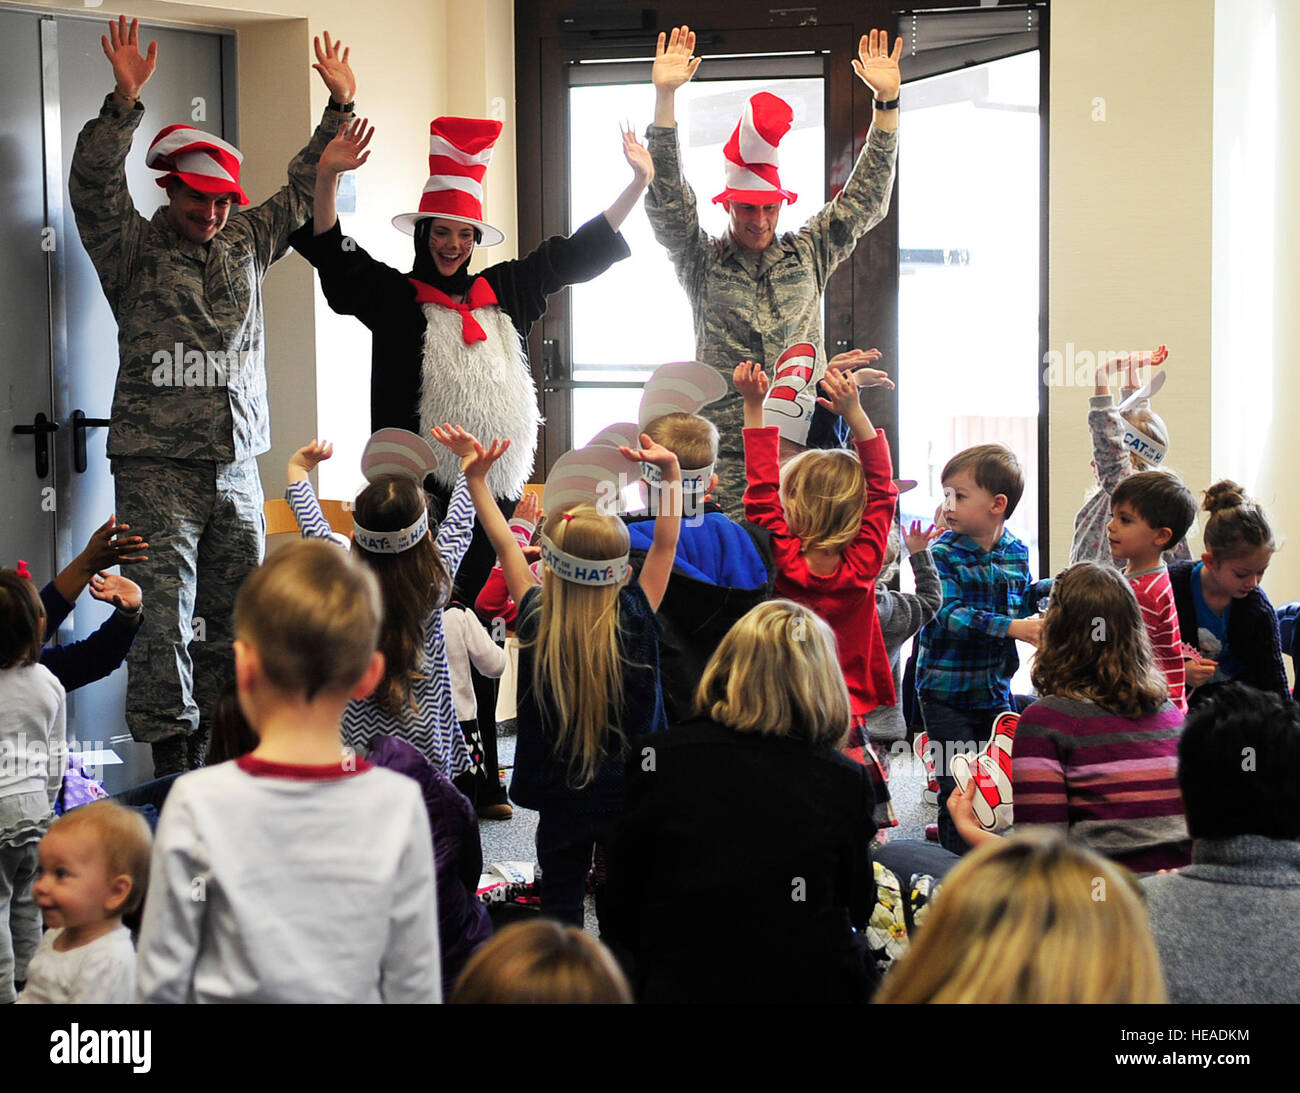 Chief Master Sgt. Steven Mandell, (left), 86th Force Support Squadron superintendent, Alison McKee, 86th FSS librarian, and Lt. Col. Thomas Ausherman, (right), 86th FSS commander, lead children through a song and dance during Read Across America, March 5, 2015, at Ramstein Air Base, Germany. The event consisted of story time, snacks and free books for the children. Airman 1st Class Larissa Greatwood) Stock Photo